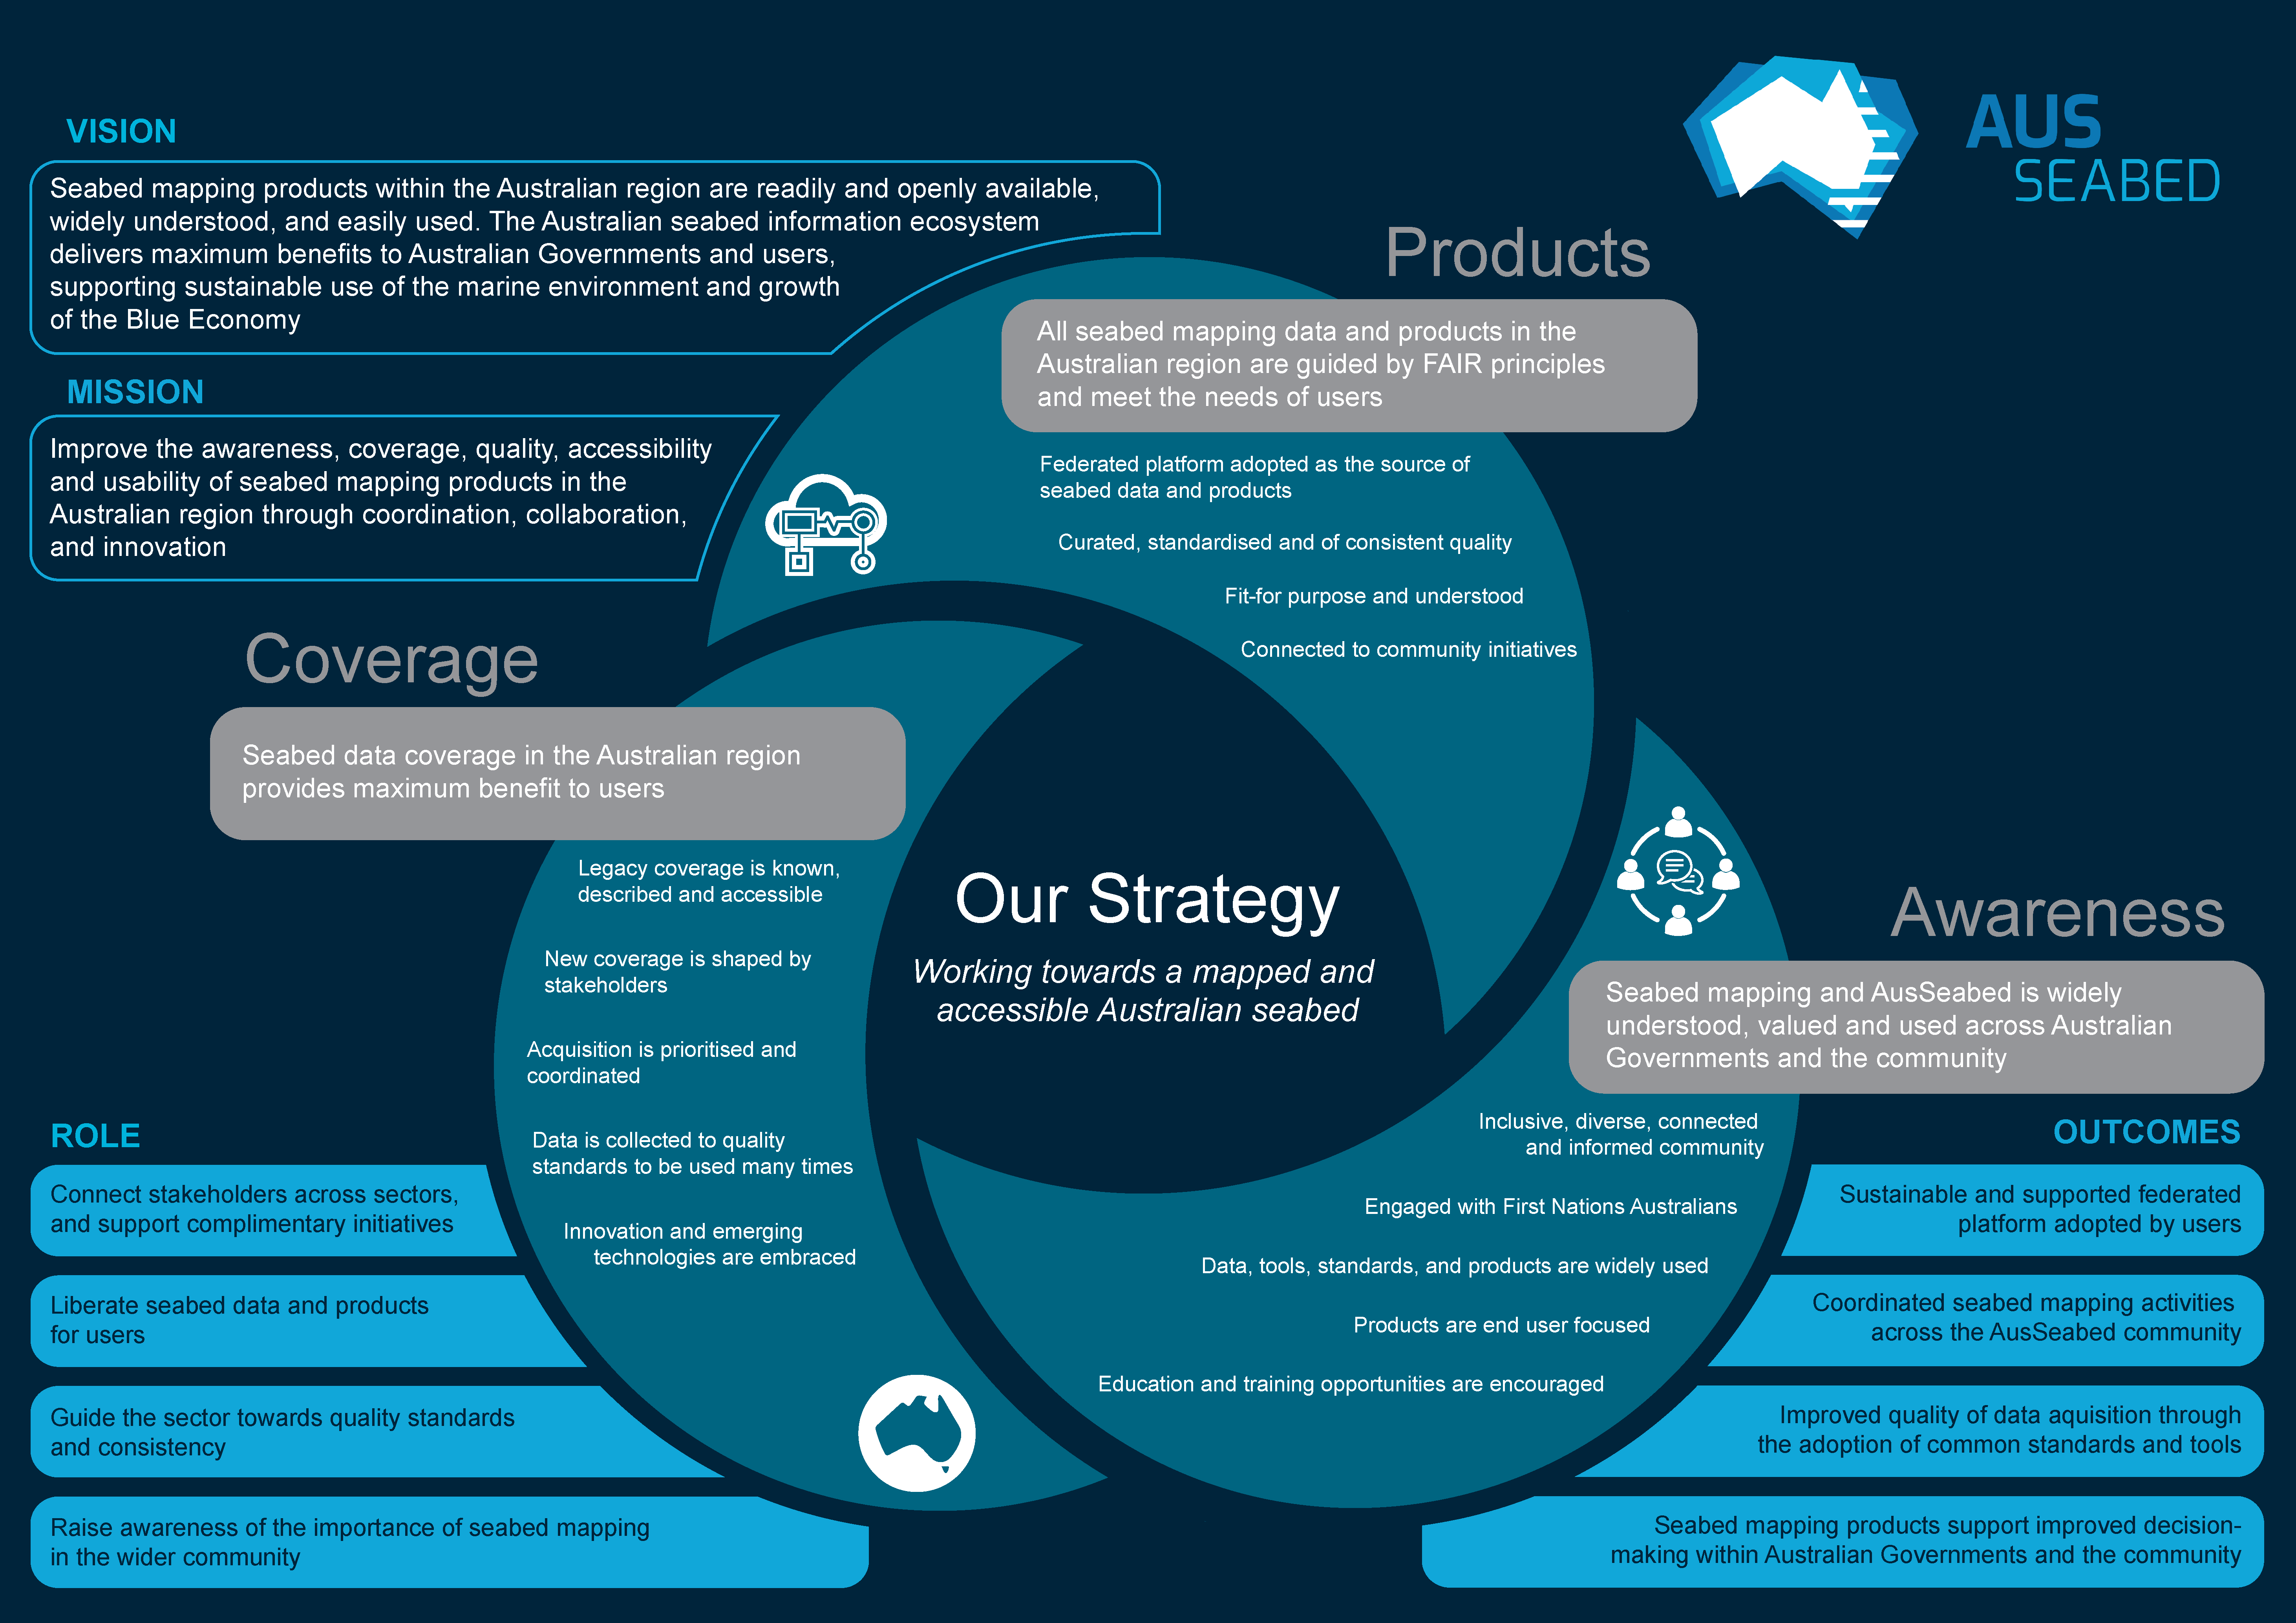 The AusSeabed Strategy is founded on three overarching goals relating to Products, Coverage and Awareness